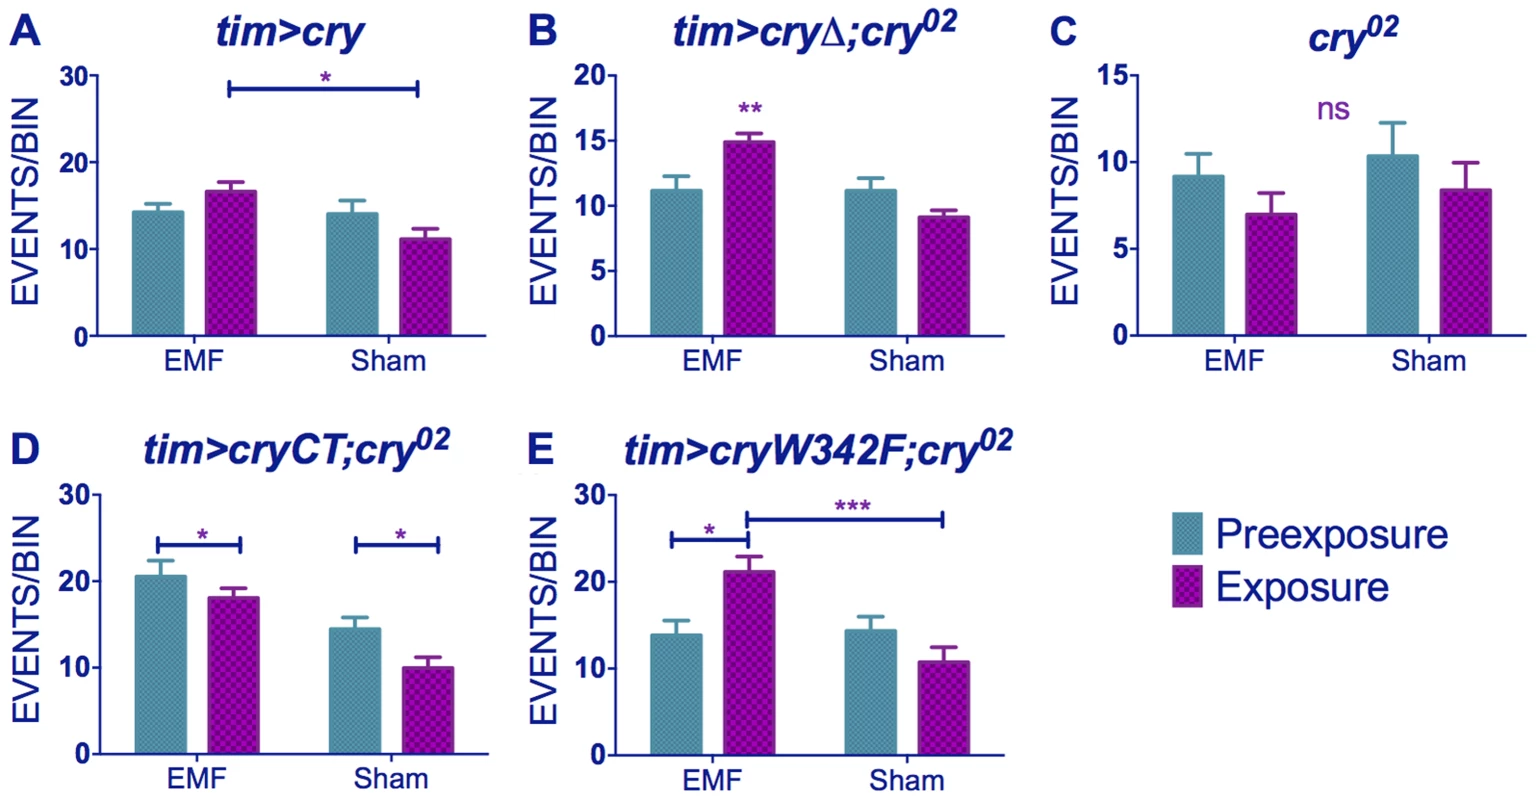 EMF-induced hyperactivity in <i>cry</i> variants.